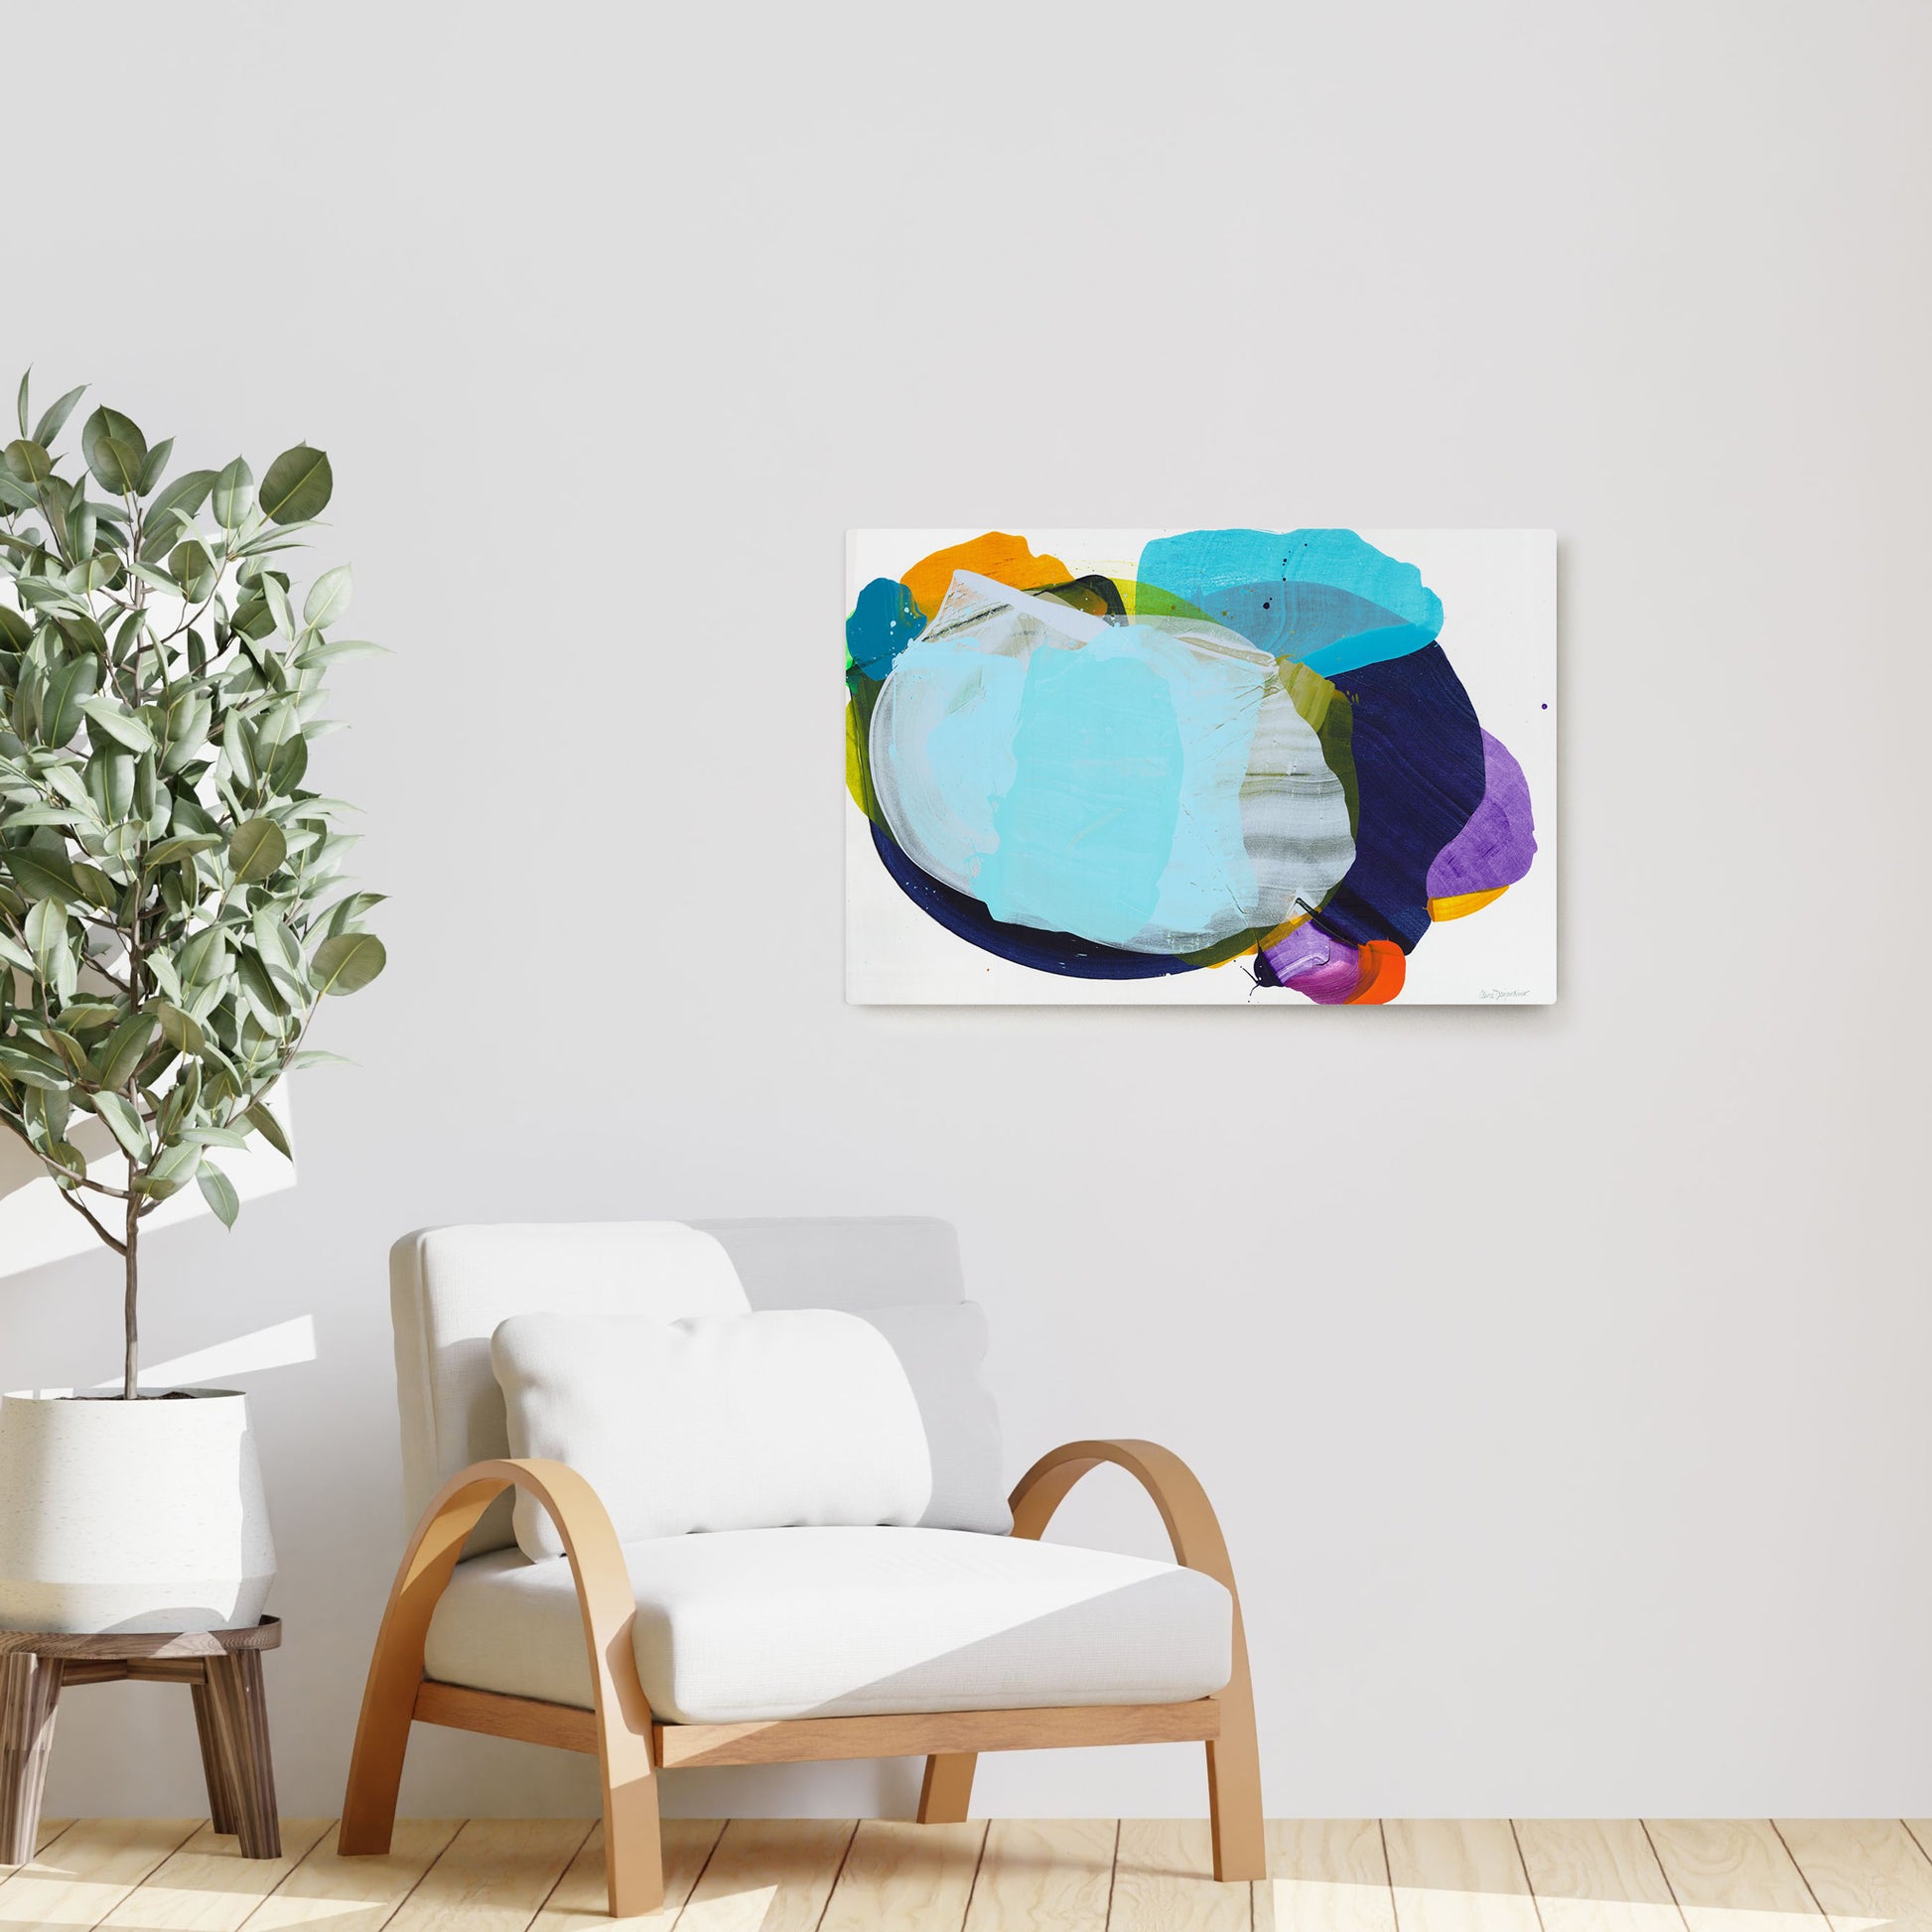 Claire Desjardins' California 10 painting reproduced on HD metal print and displayed on wall